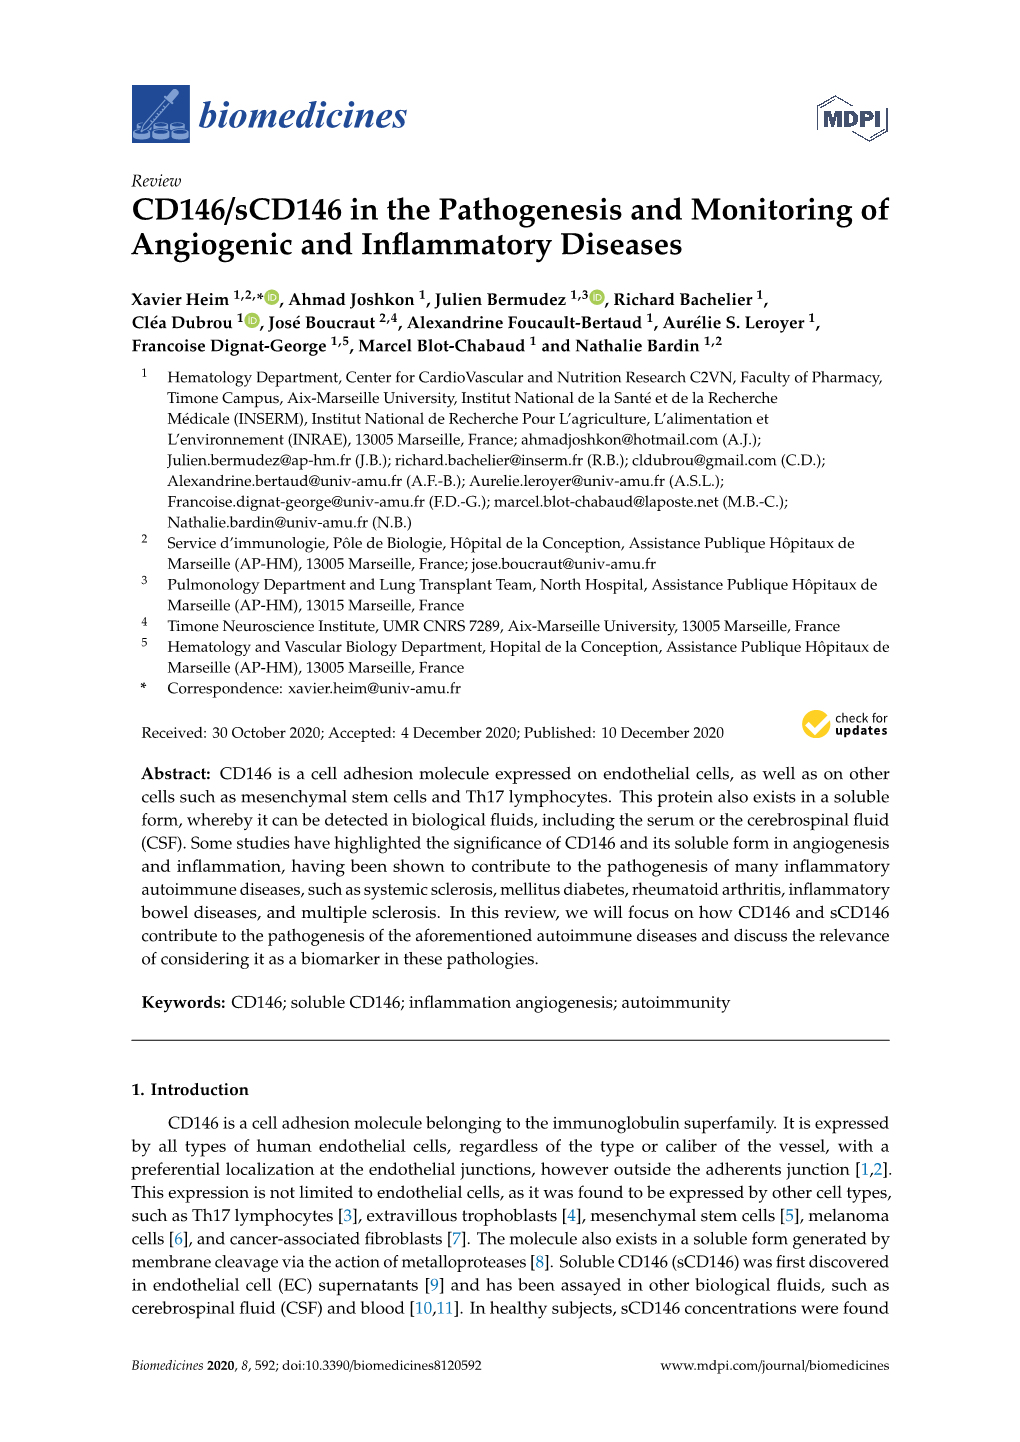 CD146/Scd146 in the Pathogenesis and Monitoring of Angiogenic and Inﬂammatory Diseases